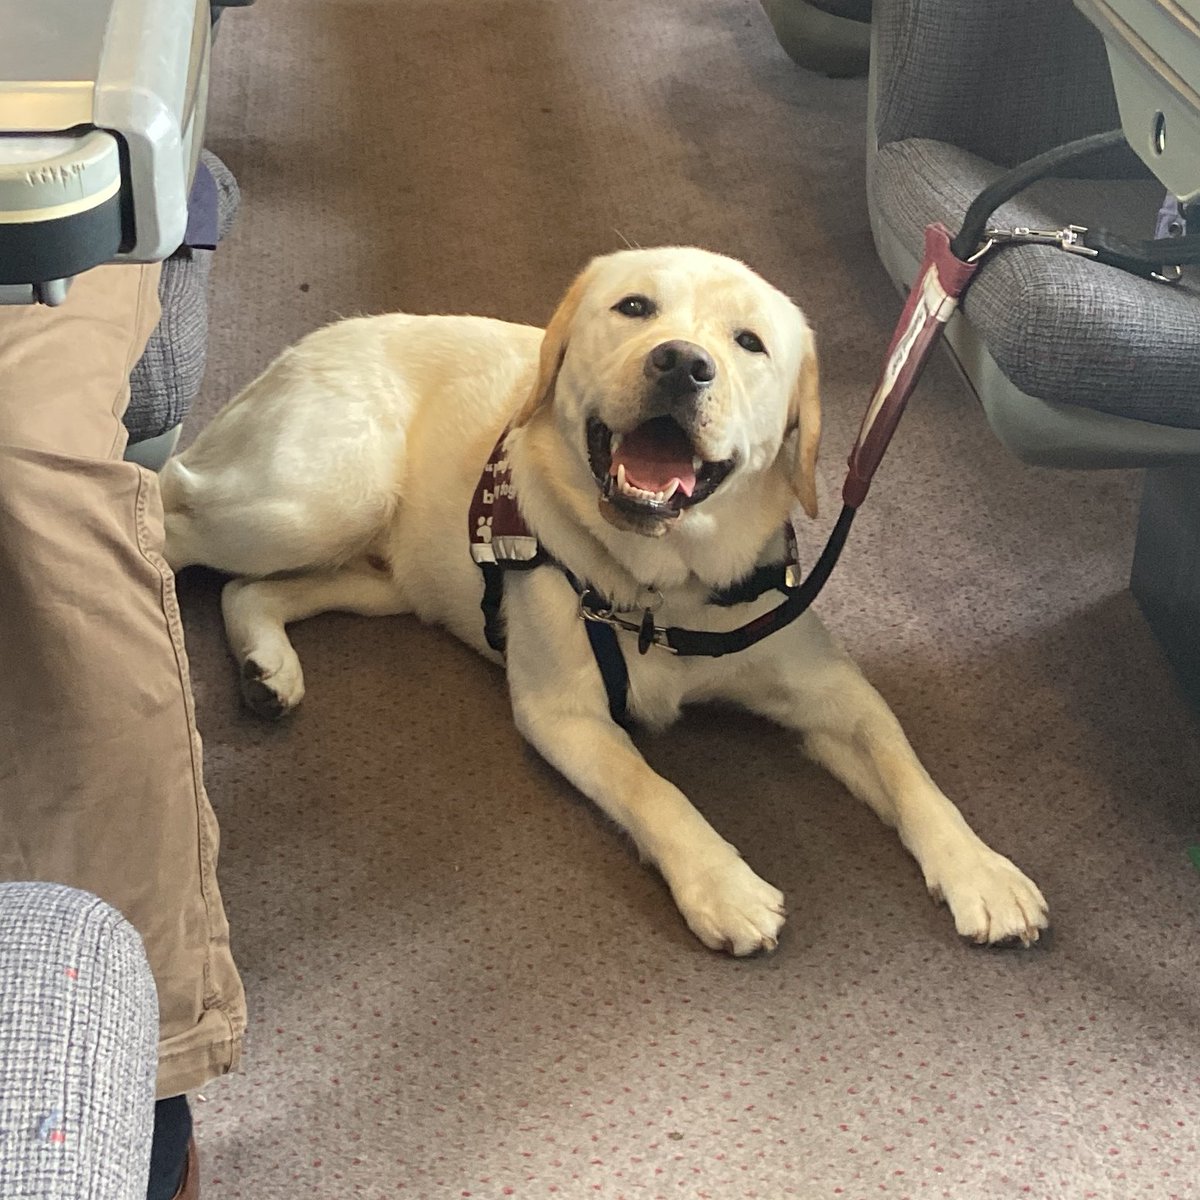 Orbit has been on his first train journey, and we think he quite enjoyed it! 😁🚆

A hearing dog might accompany their partner on public transport, so it's important they are relaxed with the experience.

Orbit did brilliantly and will build on this journey with another one soon.